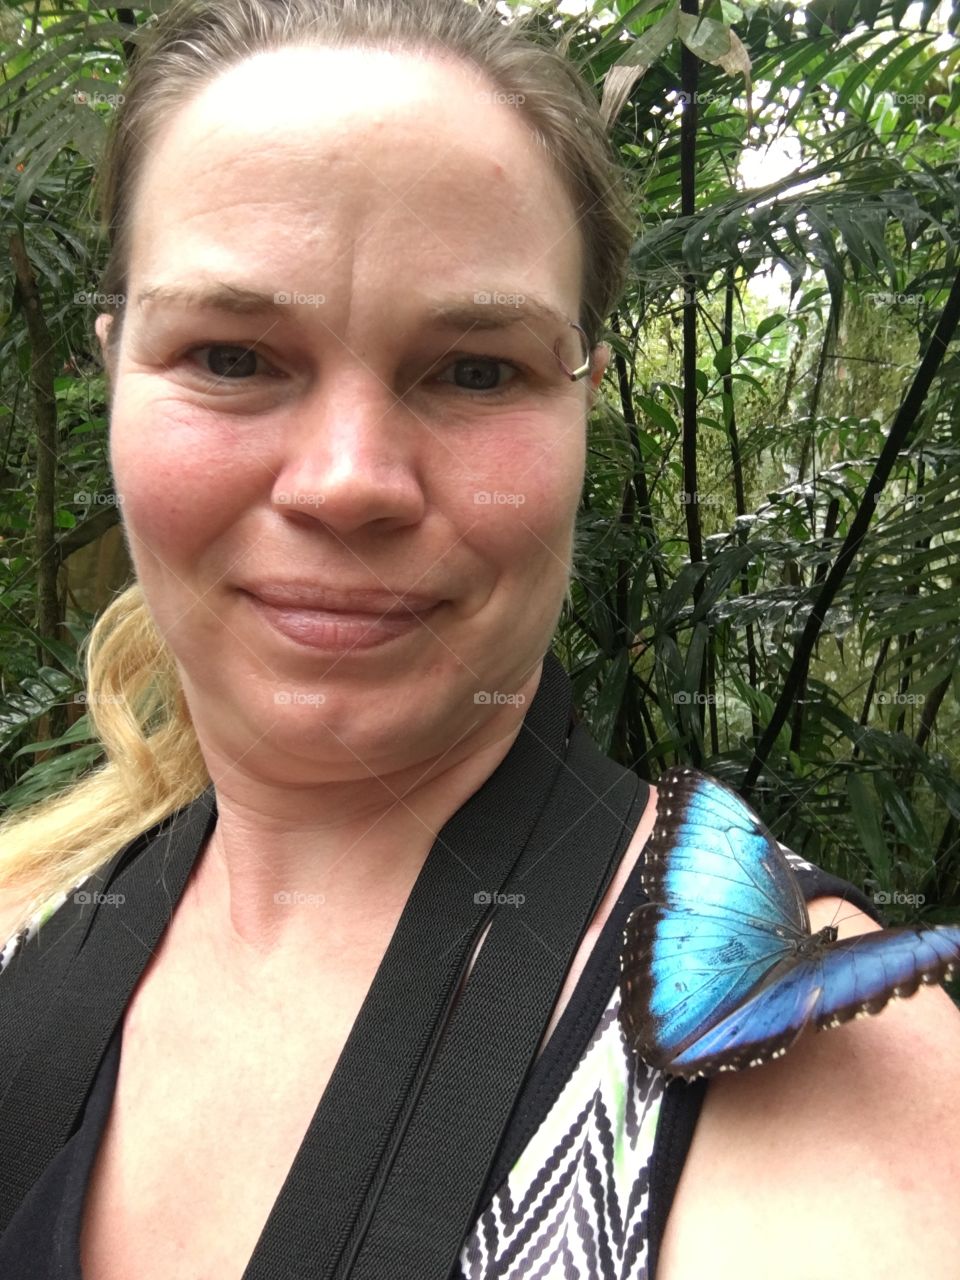 Blue Morpho Butterfly on my shoulder in Costa Rica 